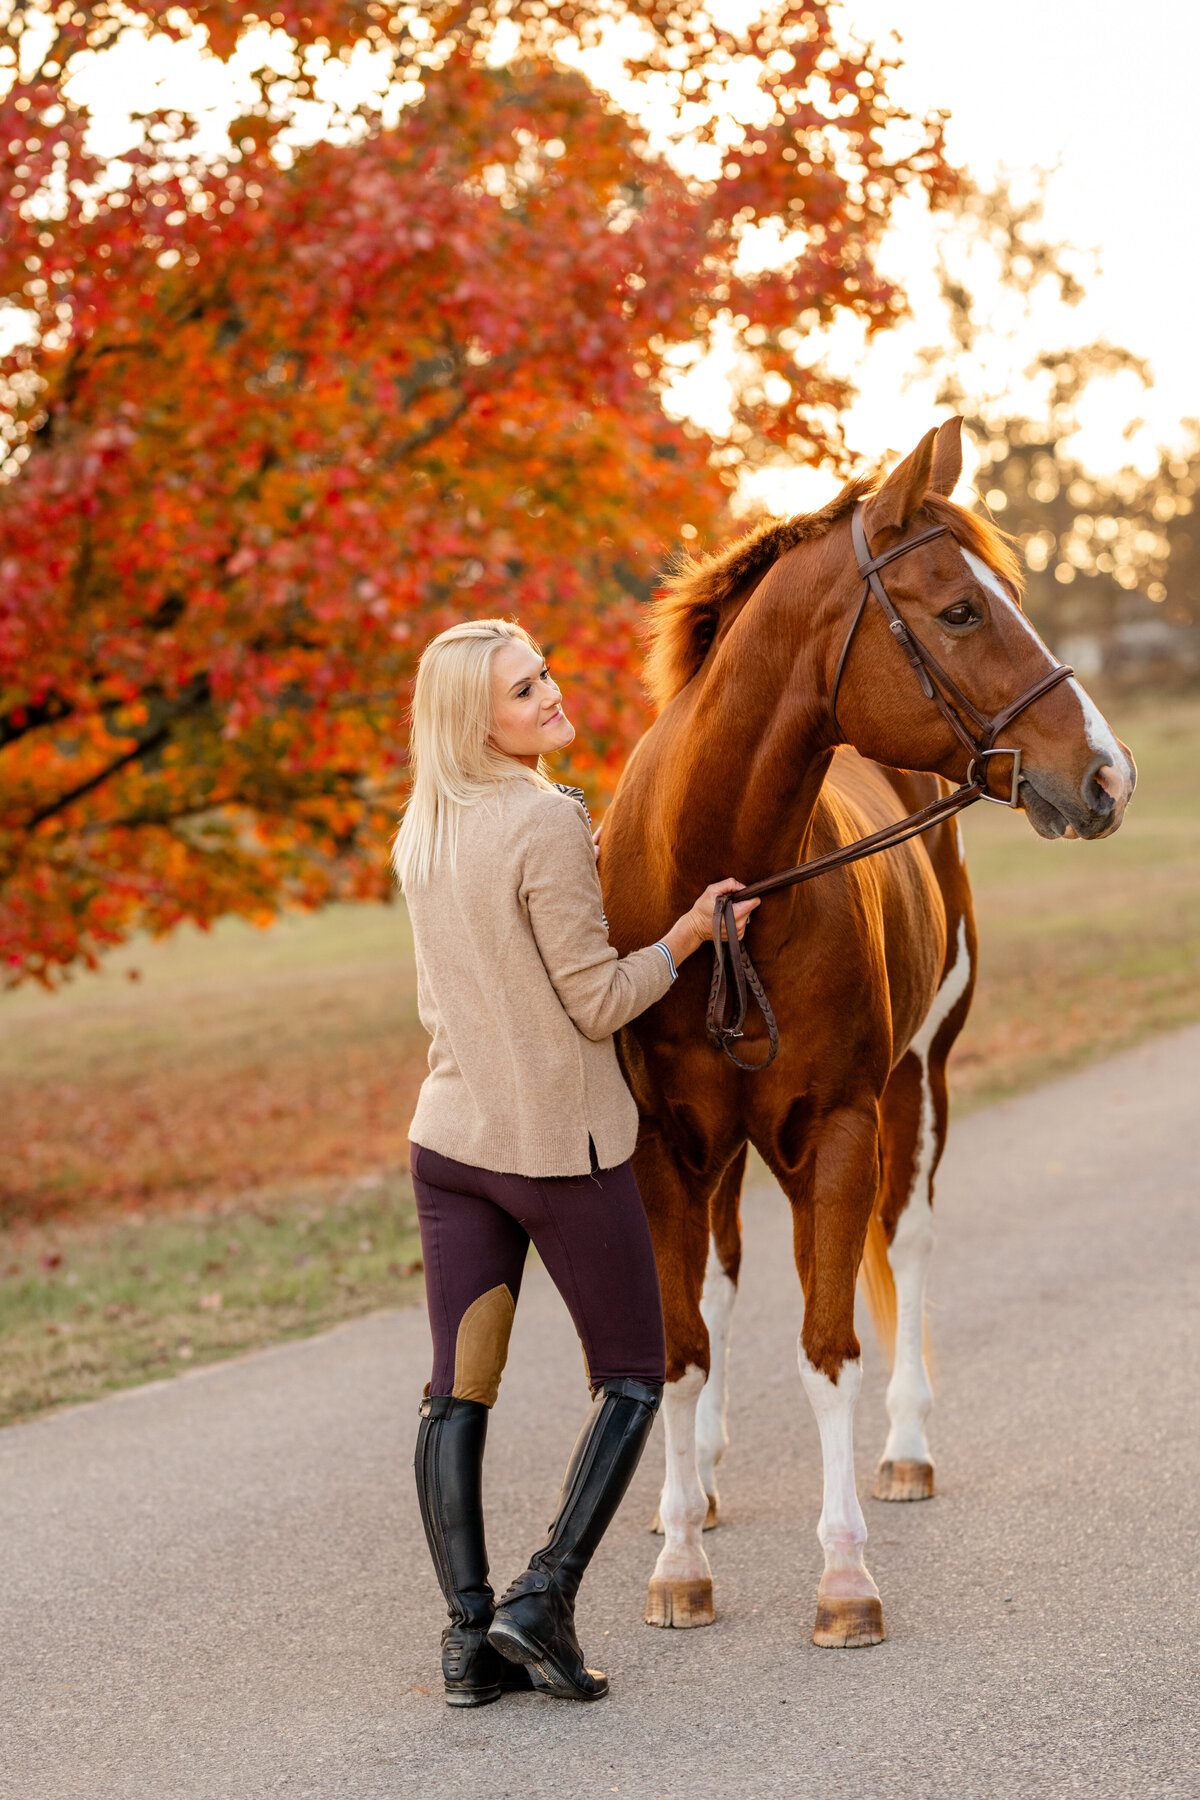 Horse and rider pictures in North Alabama with changing leaves in the fall.